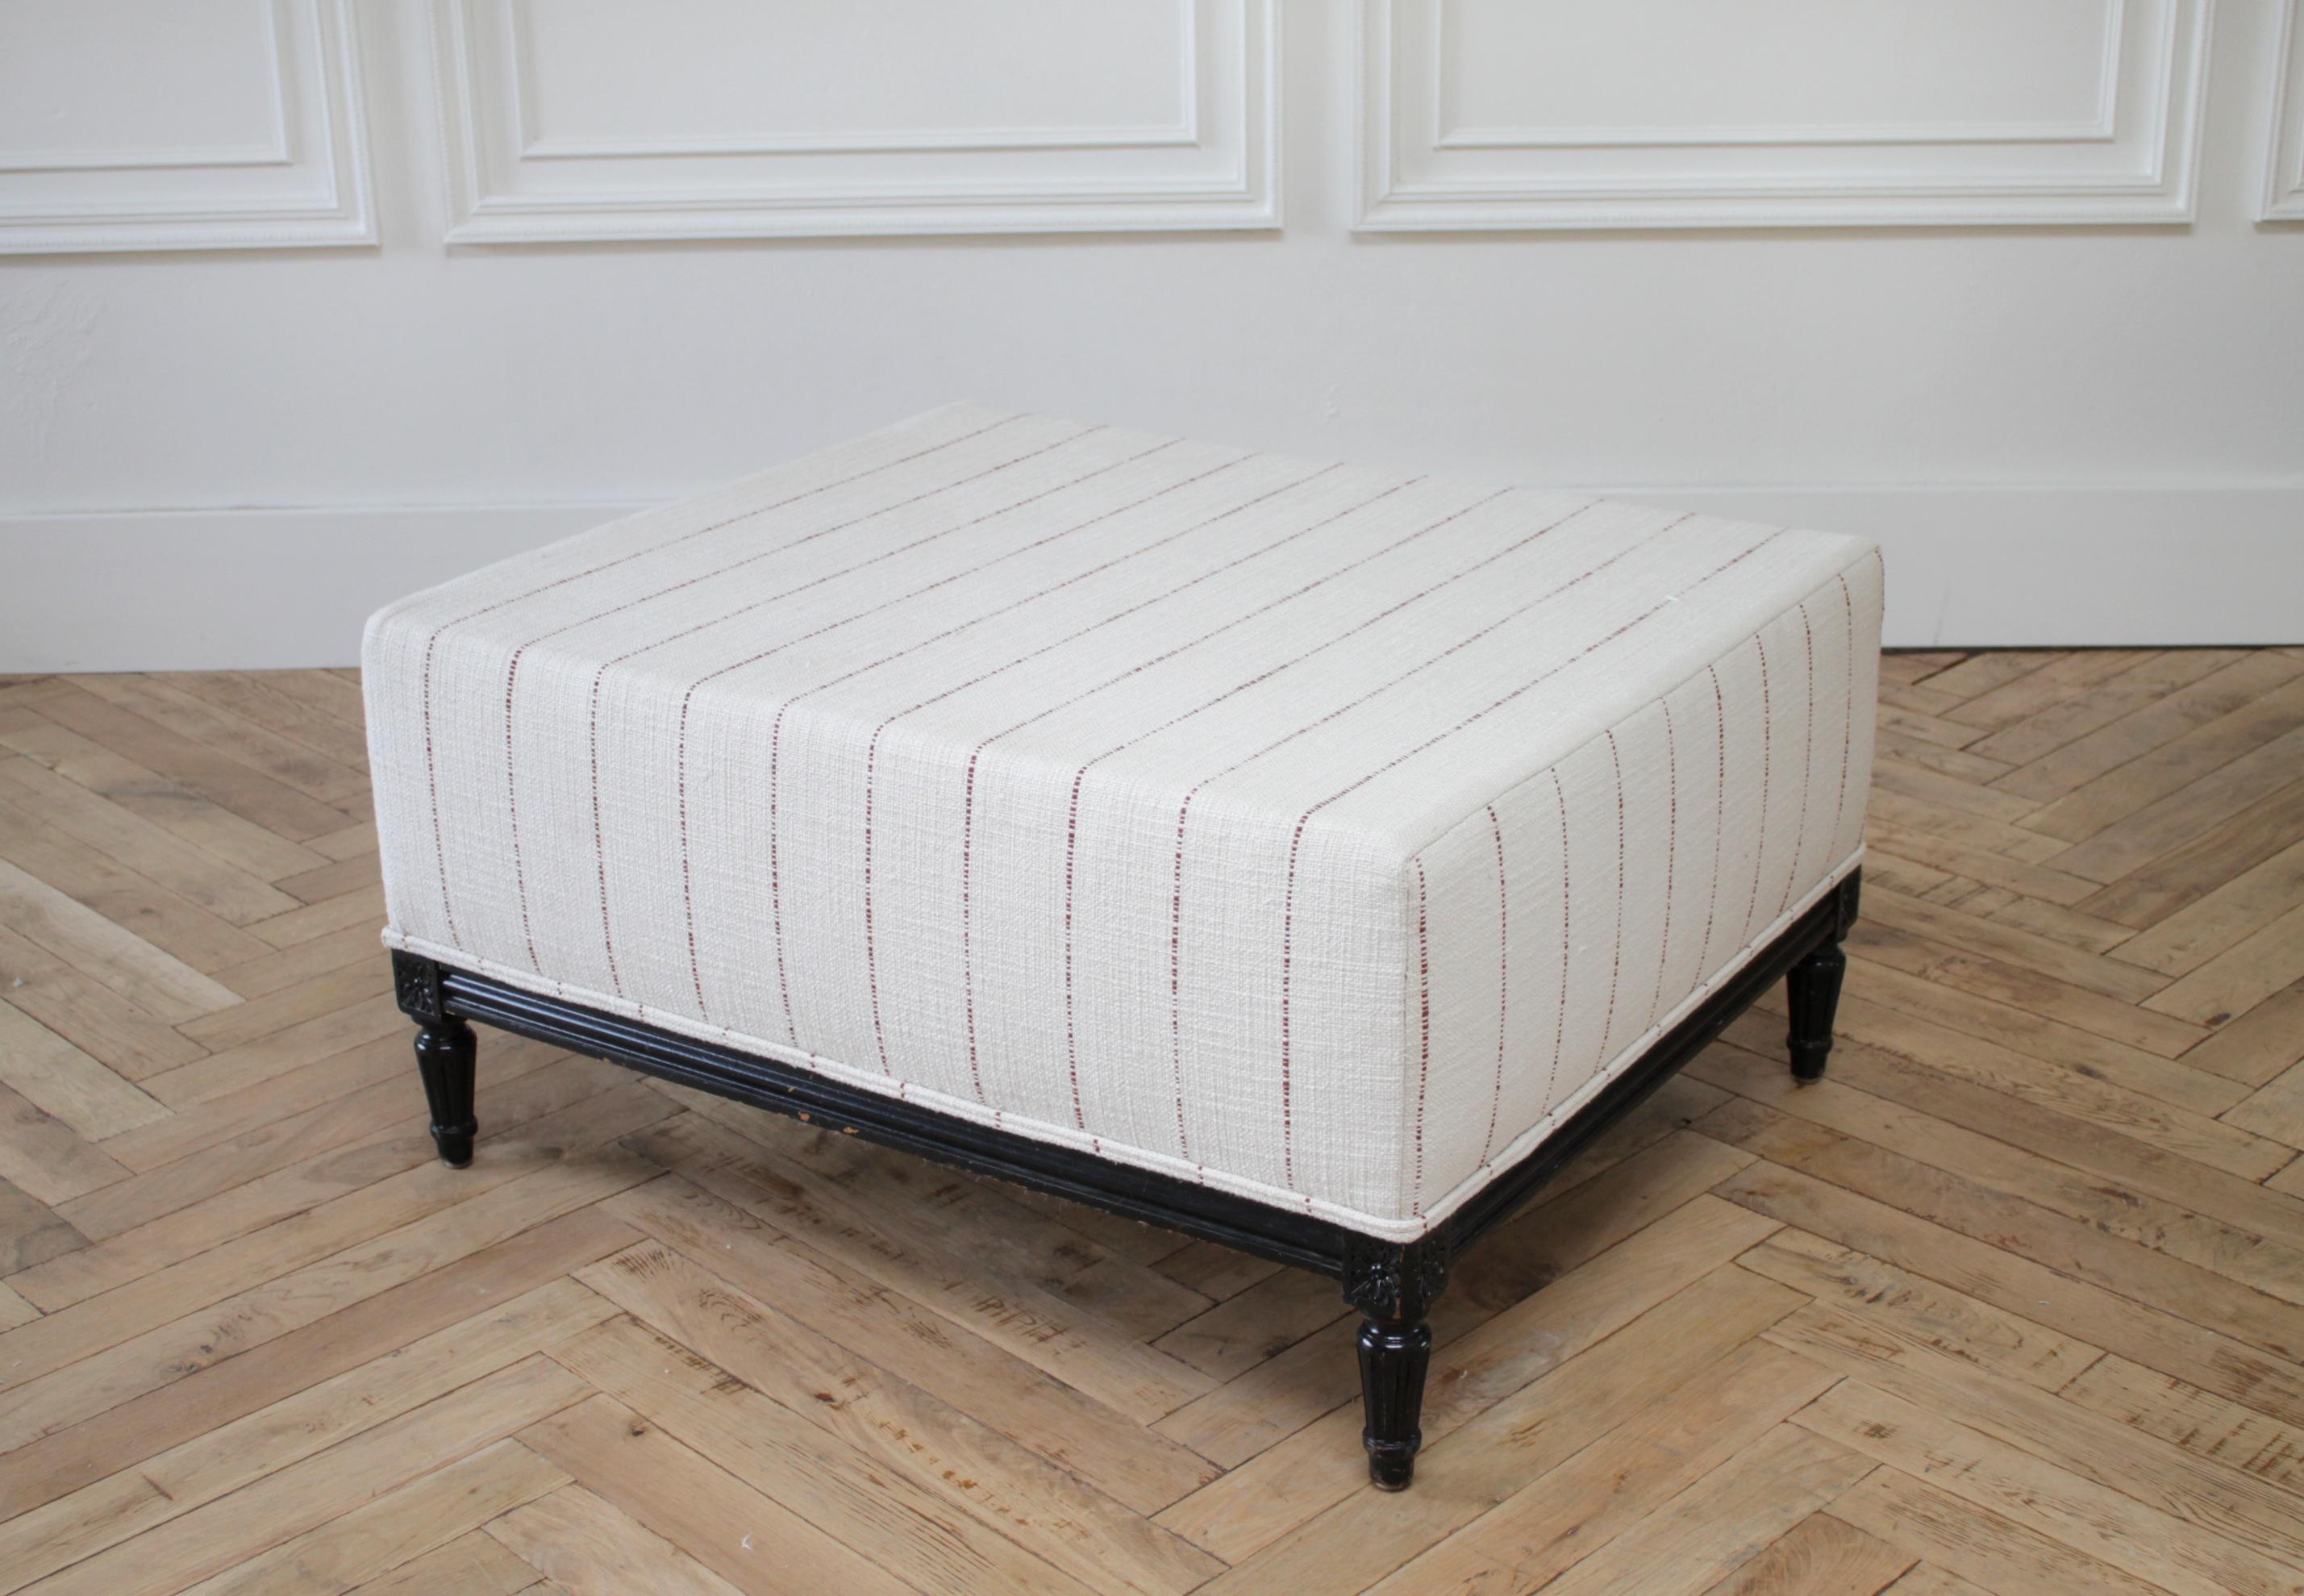 Vintage Louis XVI style upholstered bench cocktail ottoman
The frame is painted in a distressed ebony finish. We had upholstered in a thick nubby textured grain sack style fabric, that has a deep rust brown stripes. The background of the fabric is